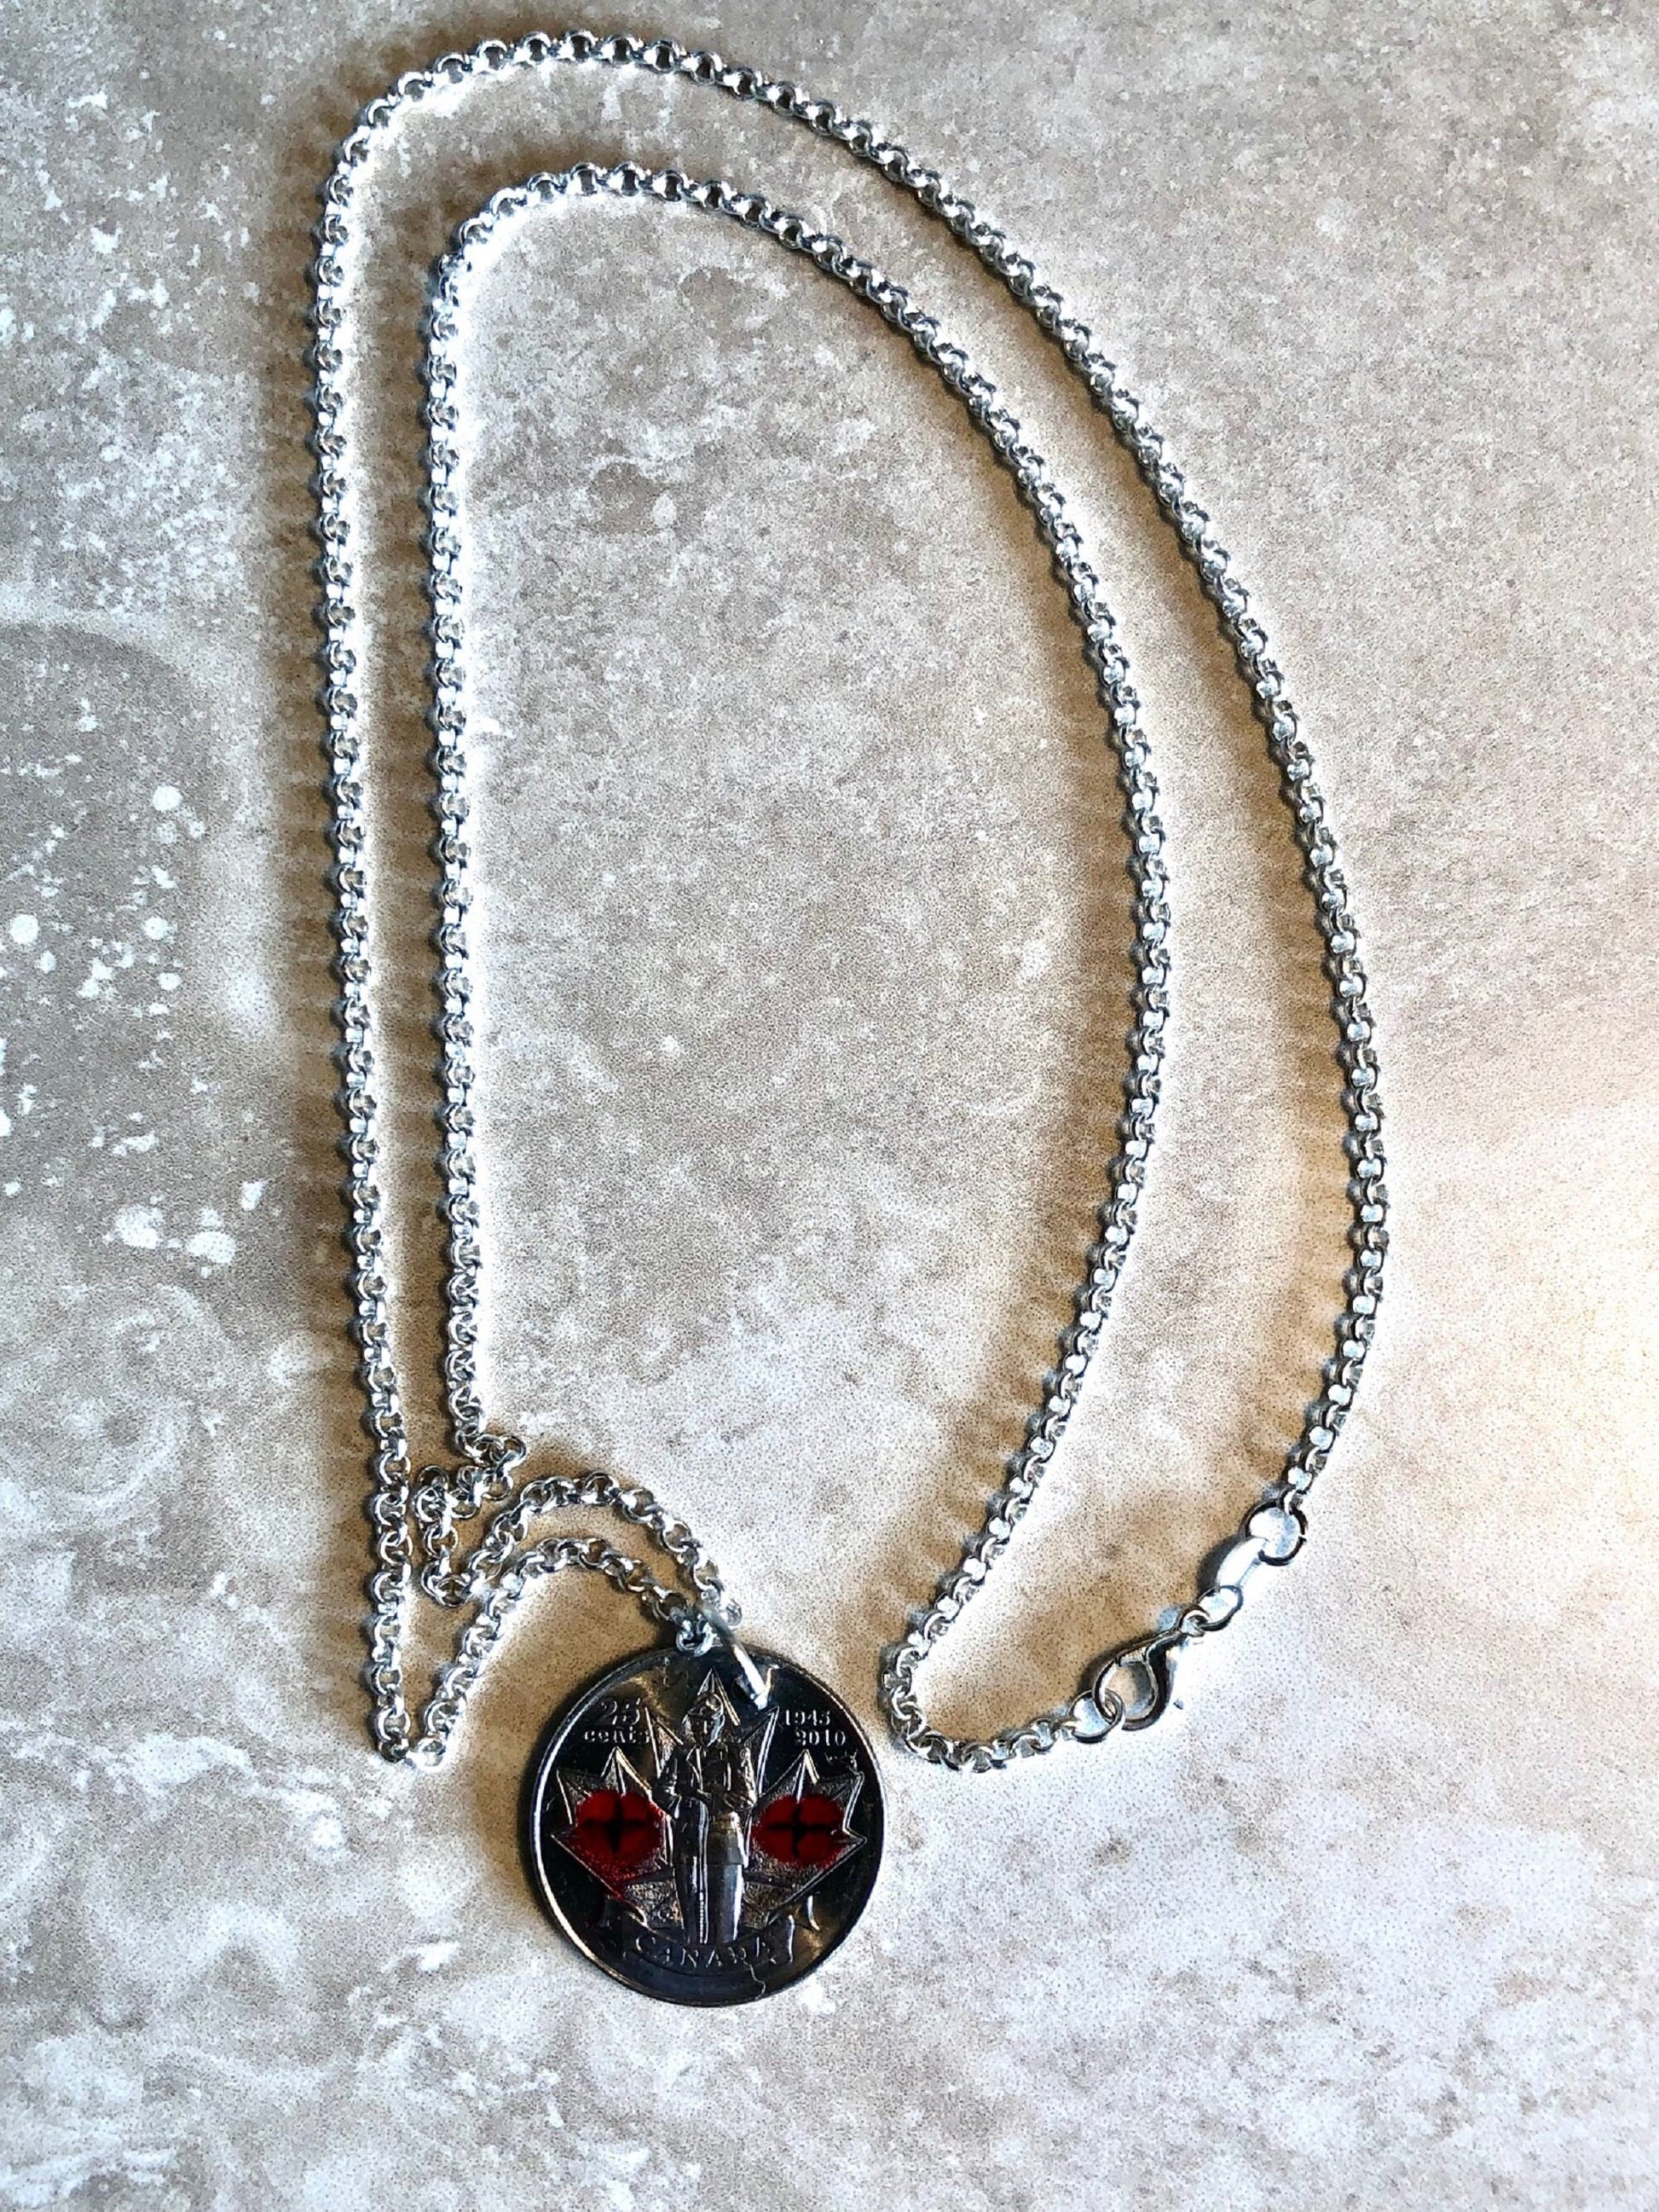 Canadian Quarter Coin Pendant Necklace Canada 2010 25 Cents Poppy Custom Made Vintage and Rare coins - Coin Enthusiast - Fashion Accessory